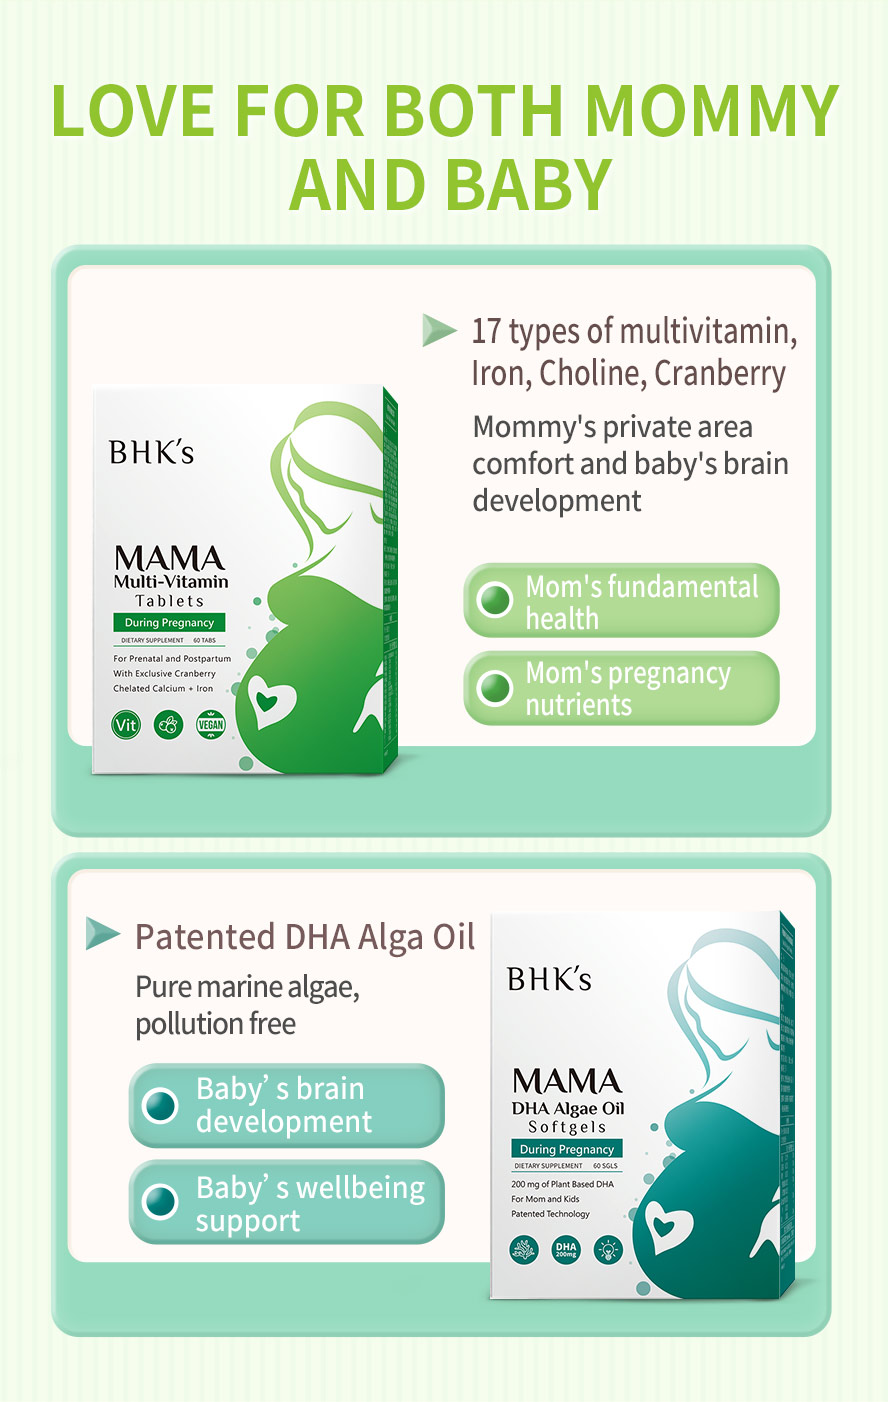 BHK pregnancy DHA Algae Oil and pregnancy Multi-vitamin for both mommy's and baby's health 